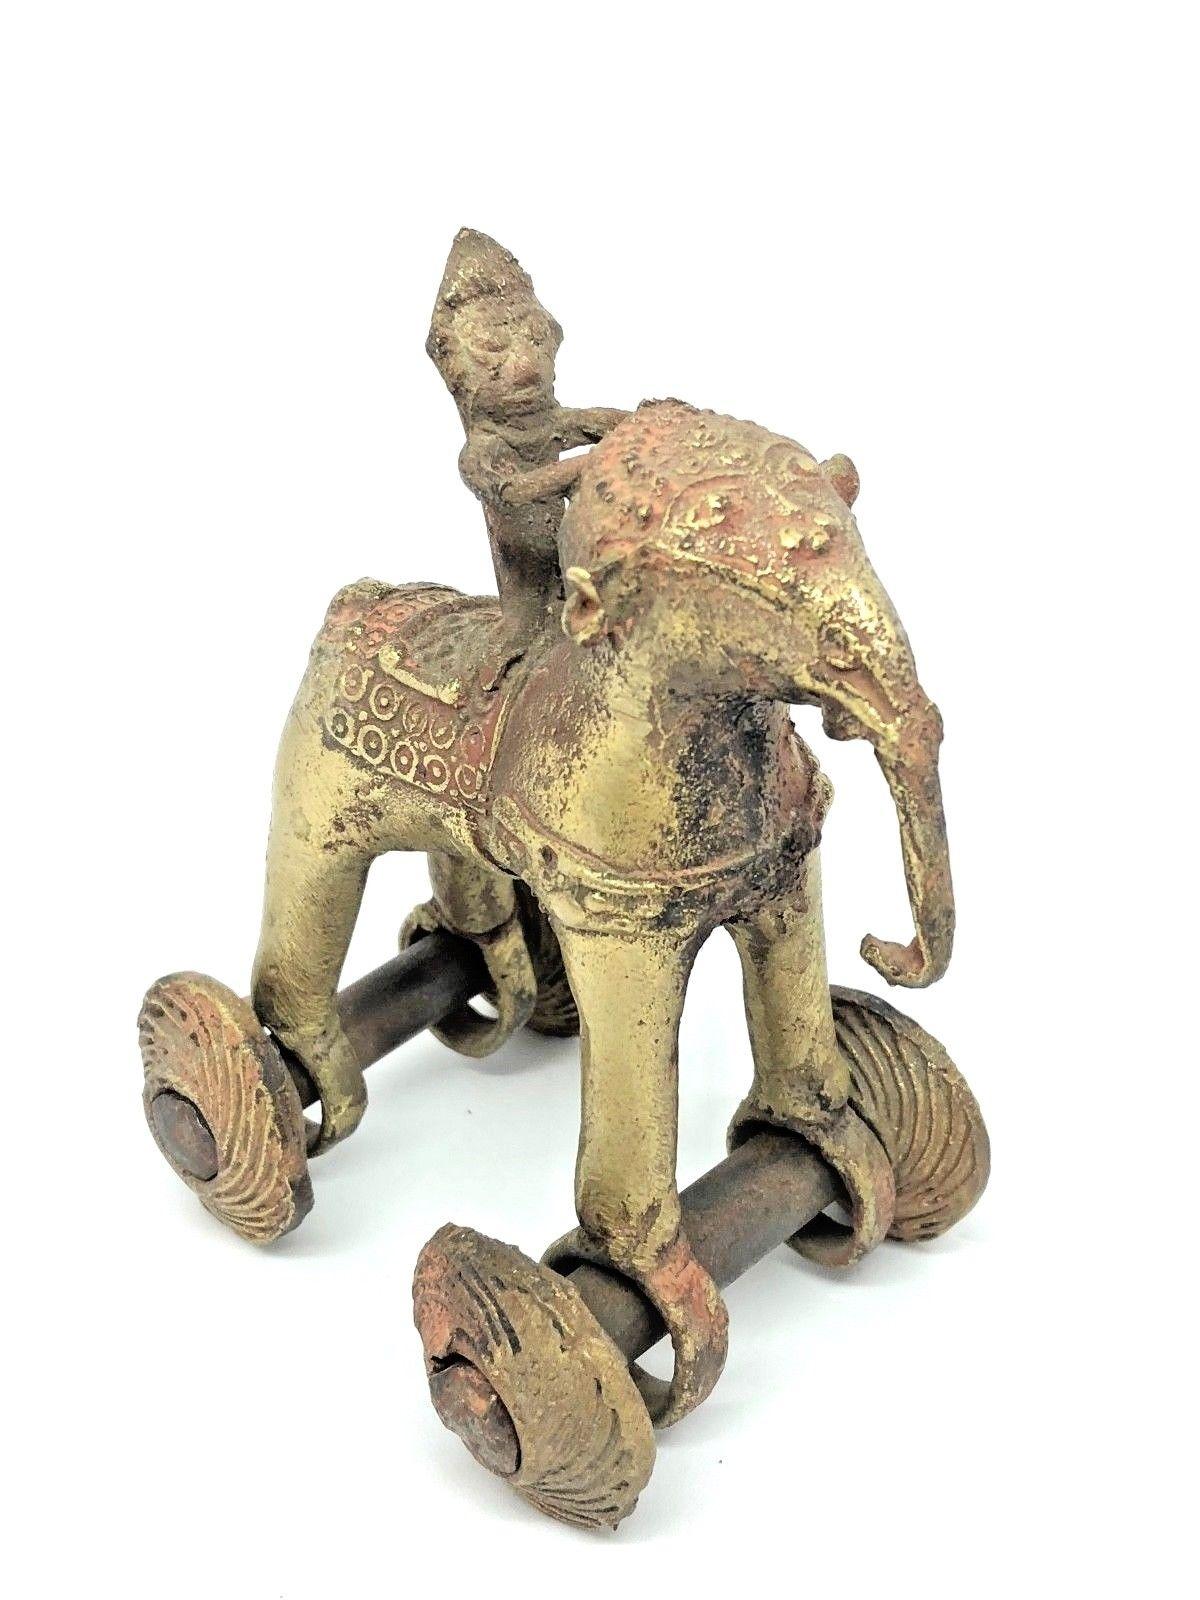 A decorative handmade elephant sculpture or toy on wheels. Some wear but this is old-age. Made of a brass or bronze. We think it is from Asia and was made early 20th century.